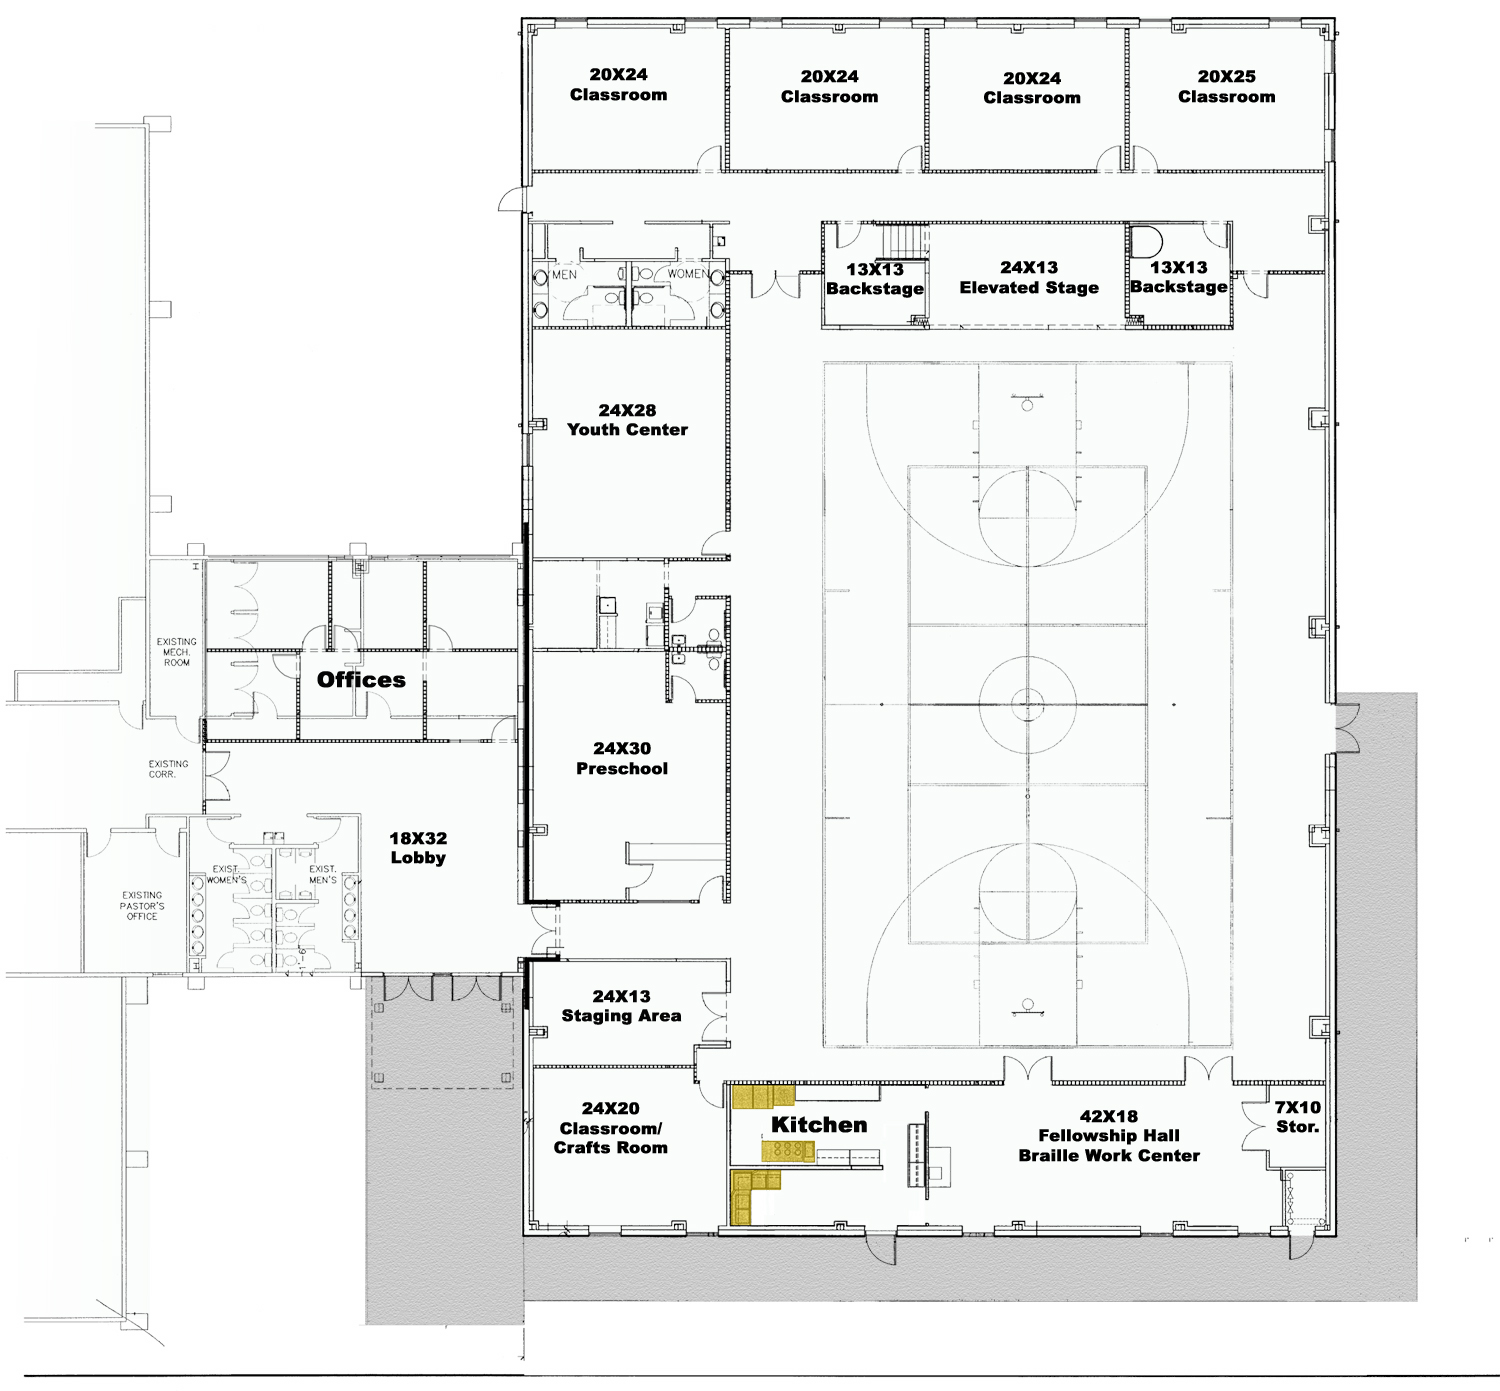 Our Building Layout